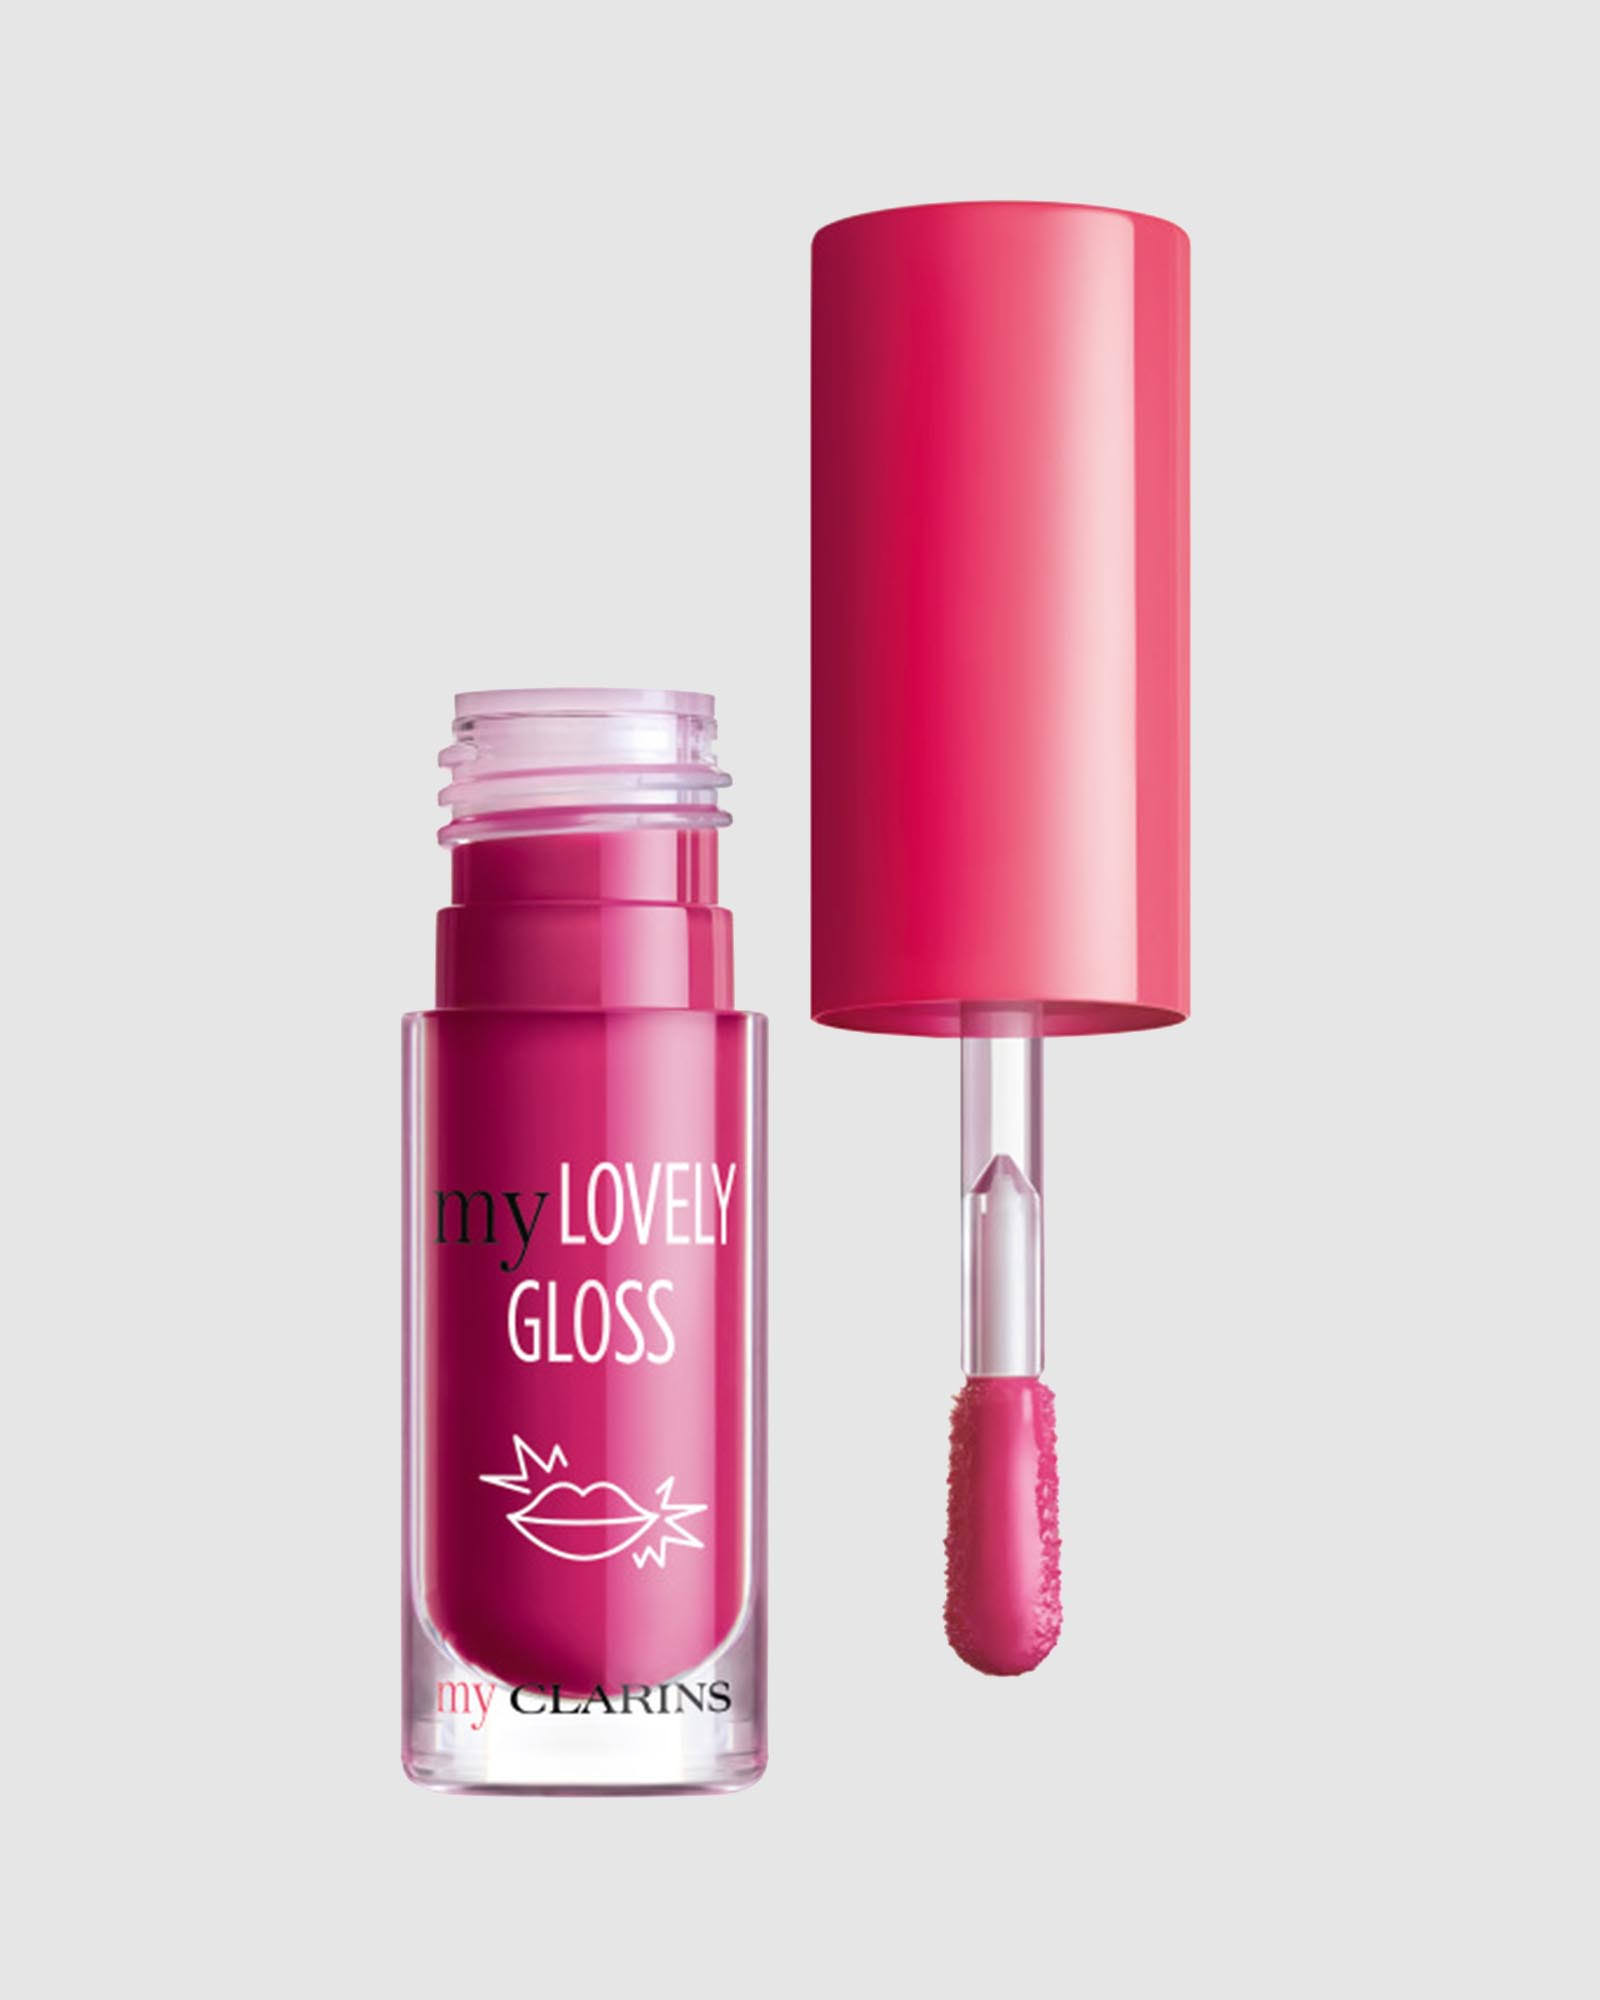 Clarins My Lovely Gloss Lip Gloss 01 Pink in Love